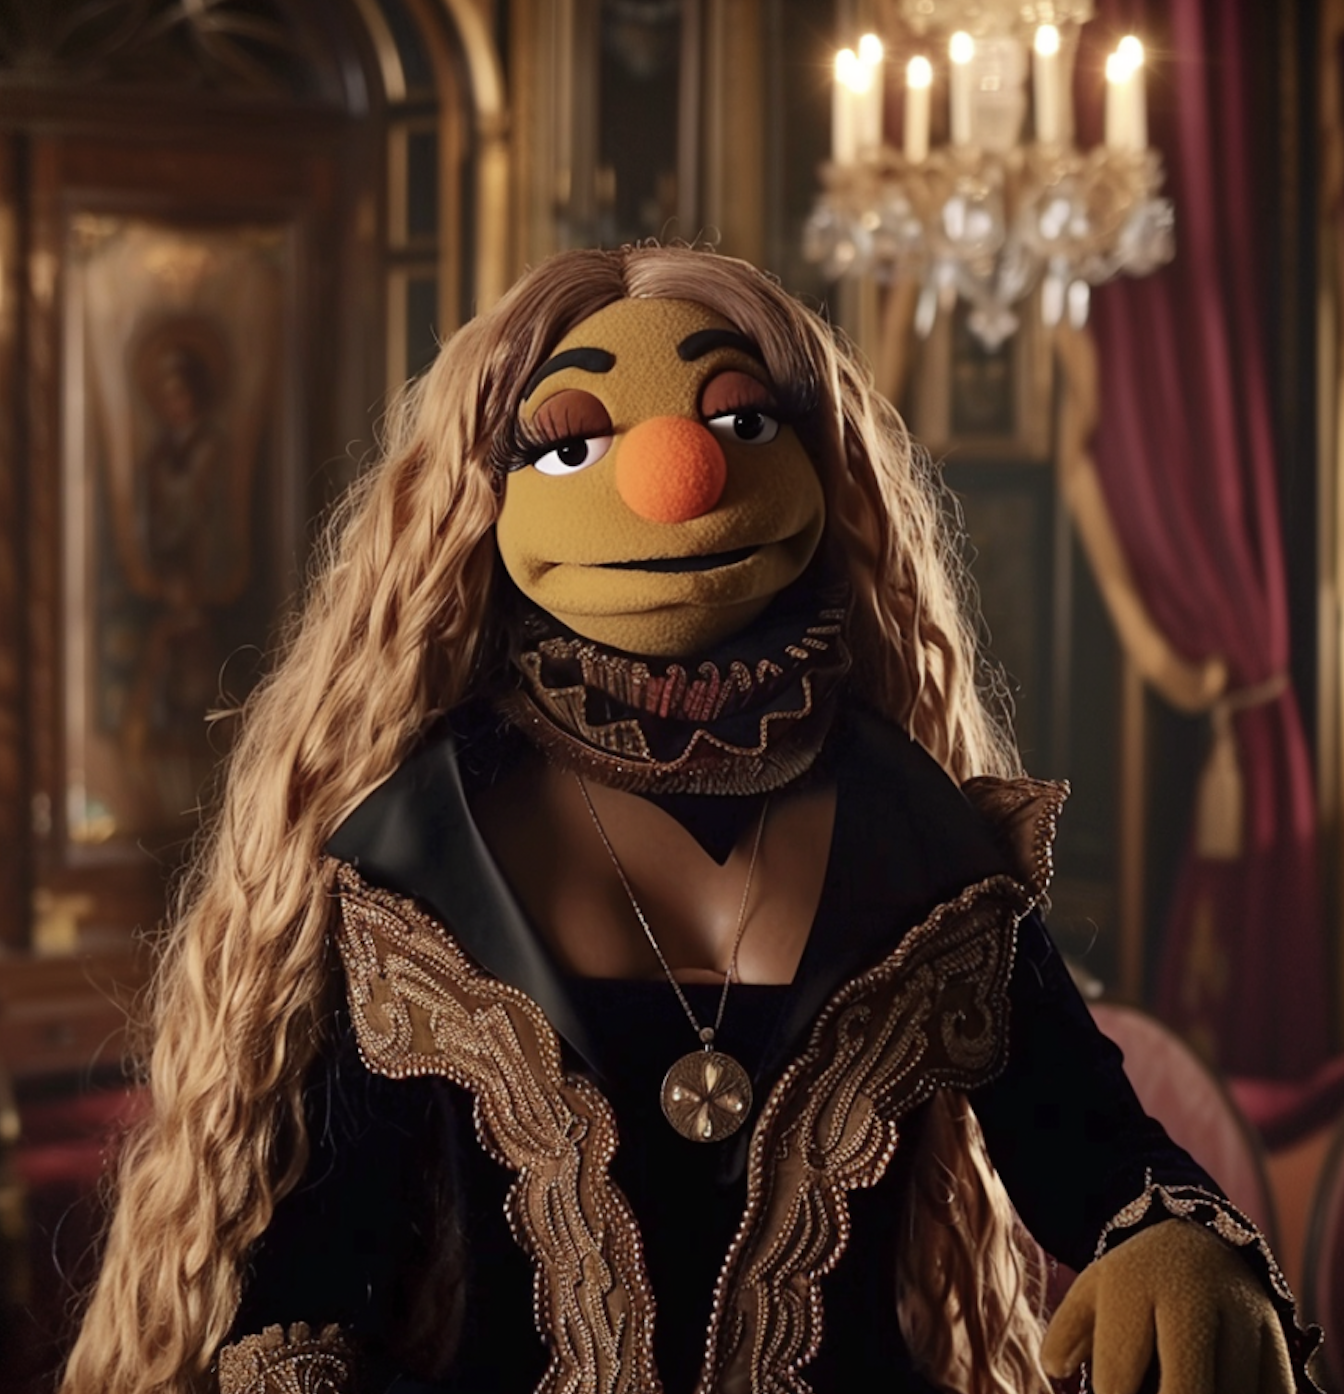 Muppet with long, wavy hair, wearing an embroidered jacket adorned with gold patterns